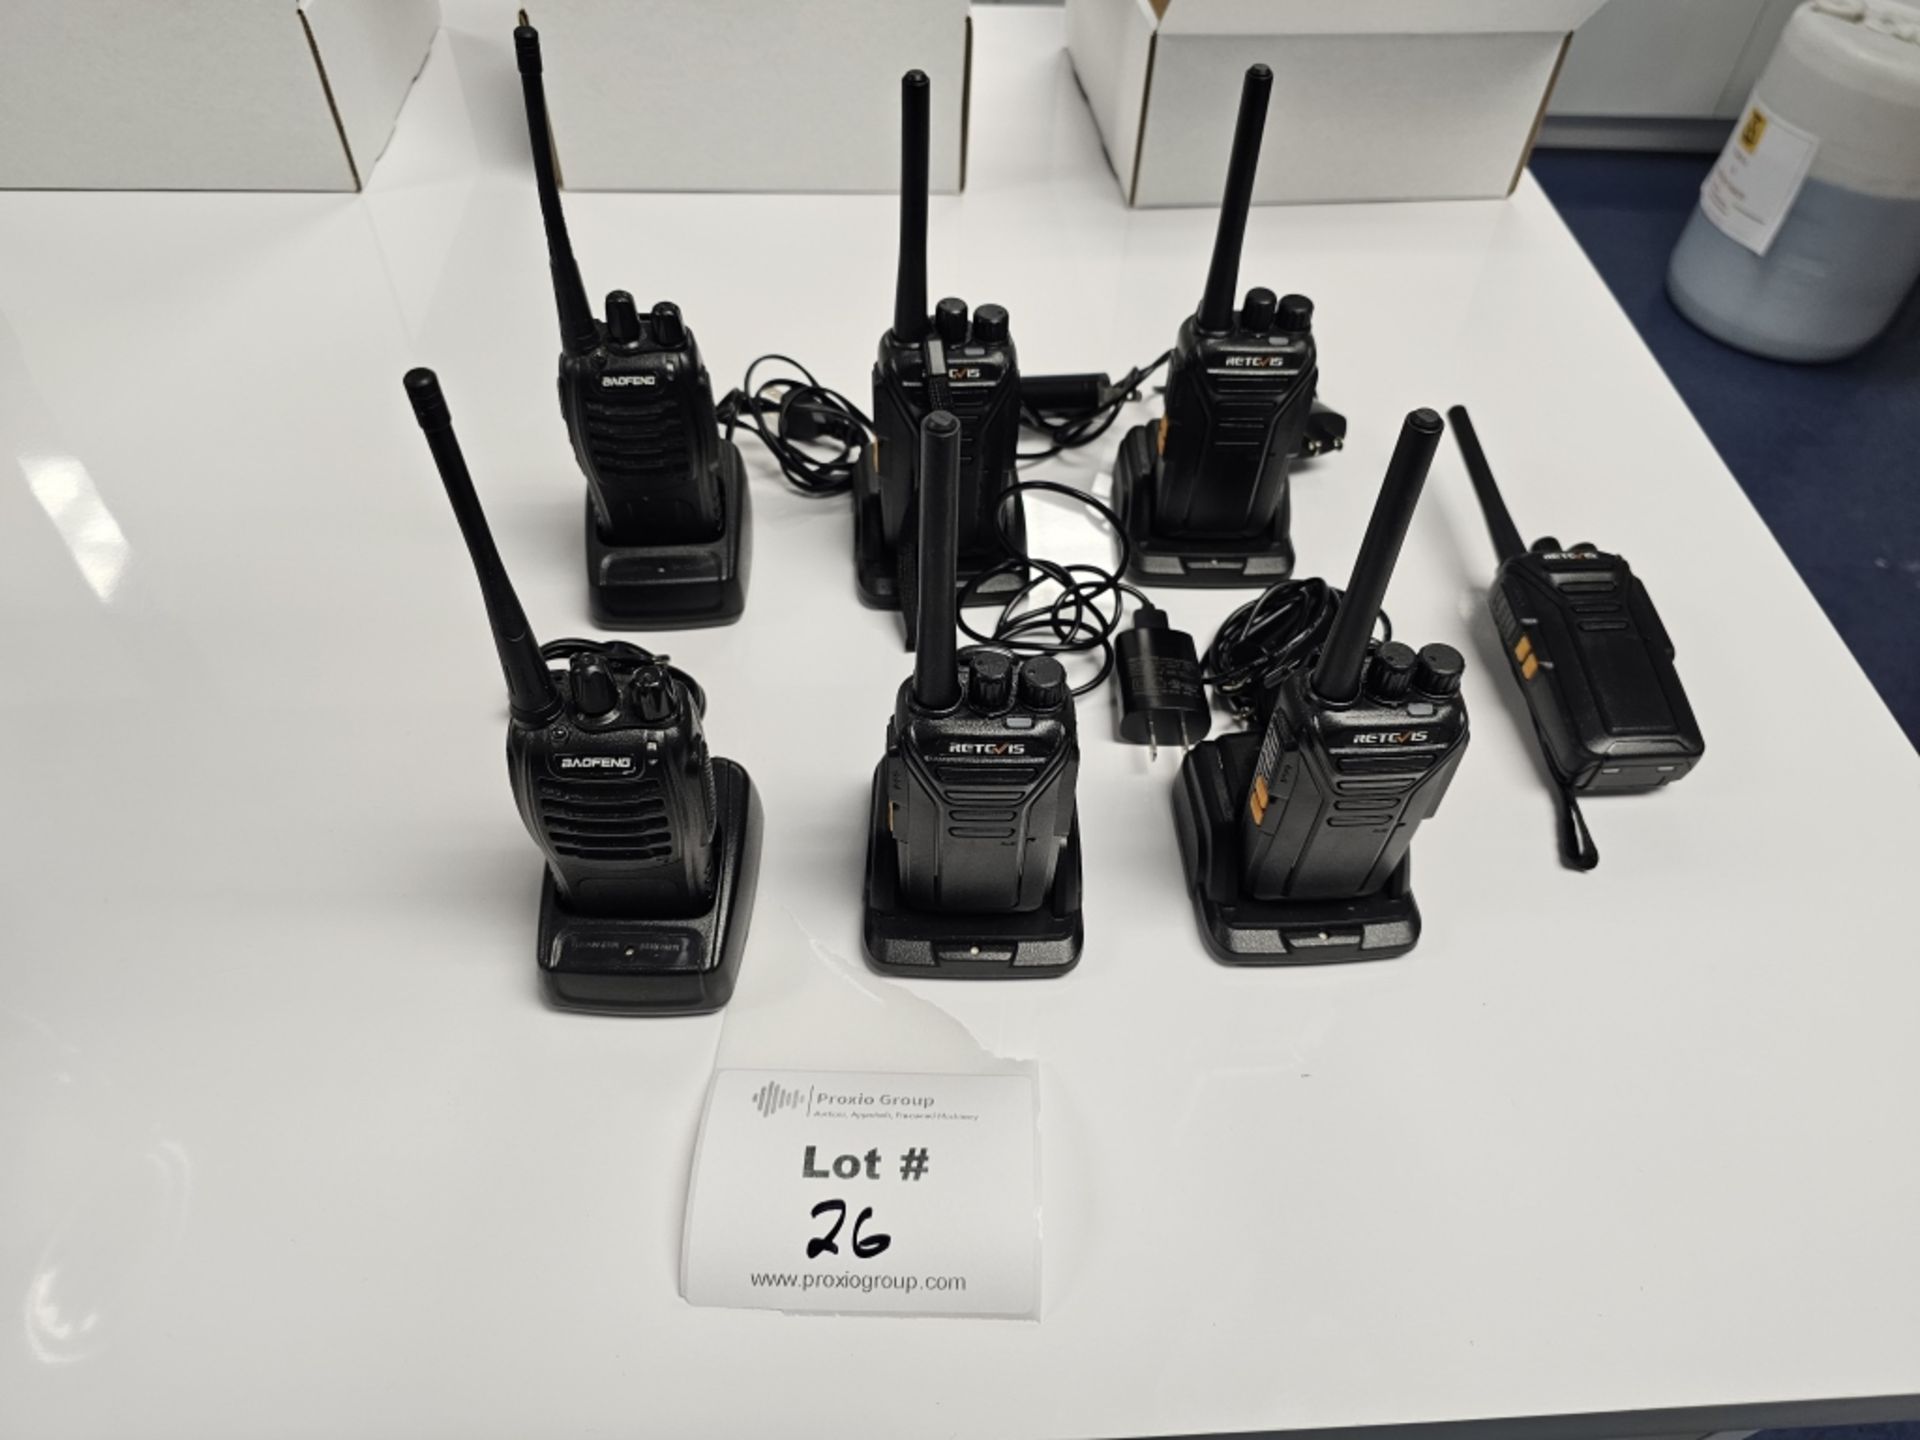 (5) Retcvis Hand Held Walkie Talkies With (4) Chargers, (2) Baofeng Walkie Talkies With Chargers - Image 2 of 5